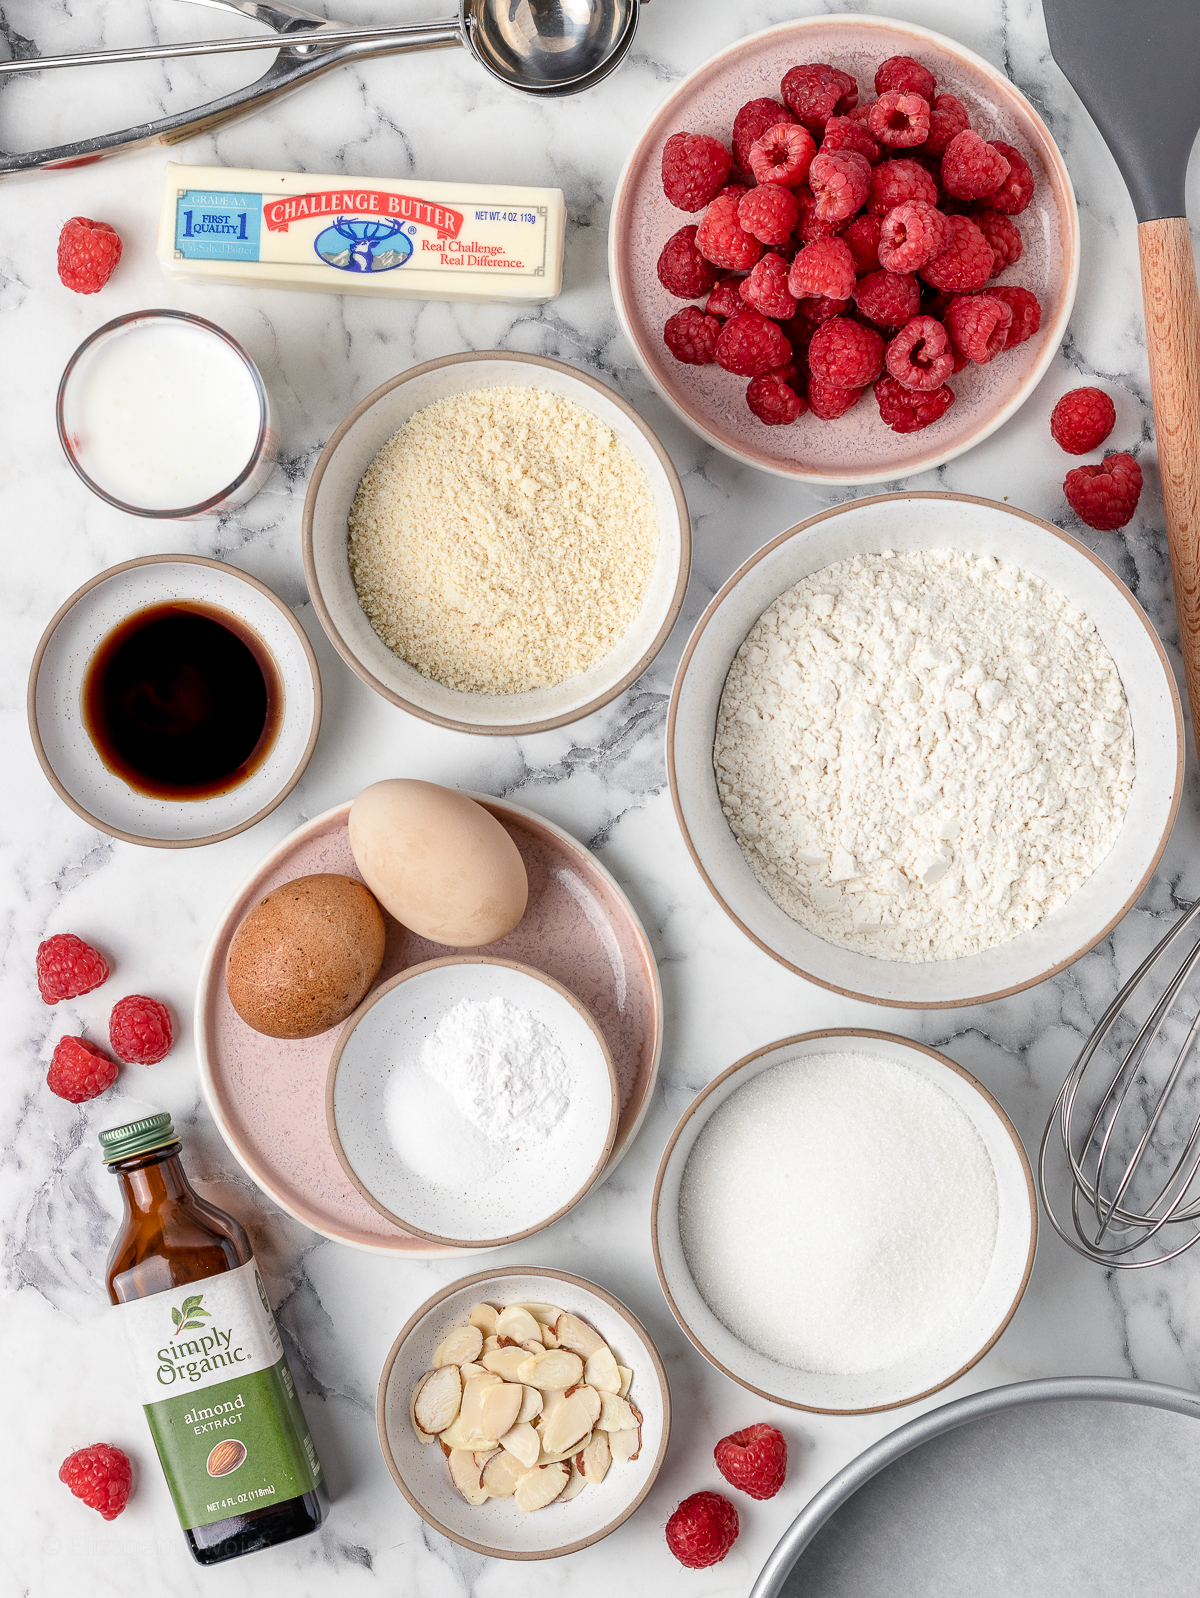 Ingredients for the cake. Fresh raspberries, unsalted butter, granulated sugar, almond extract, vanilla extract, eggs, all purpose flour, almond flour, baking powder, salt, buttermilk, and sliced almonds.